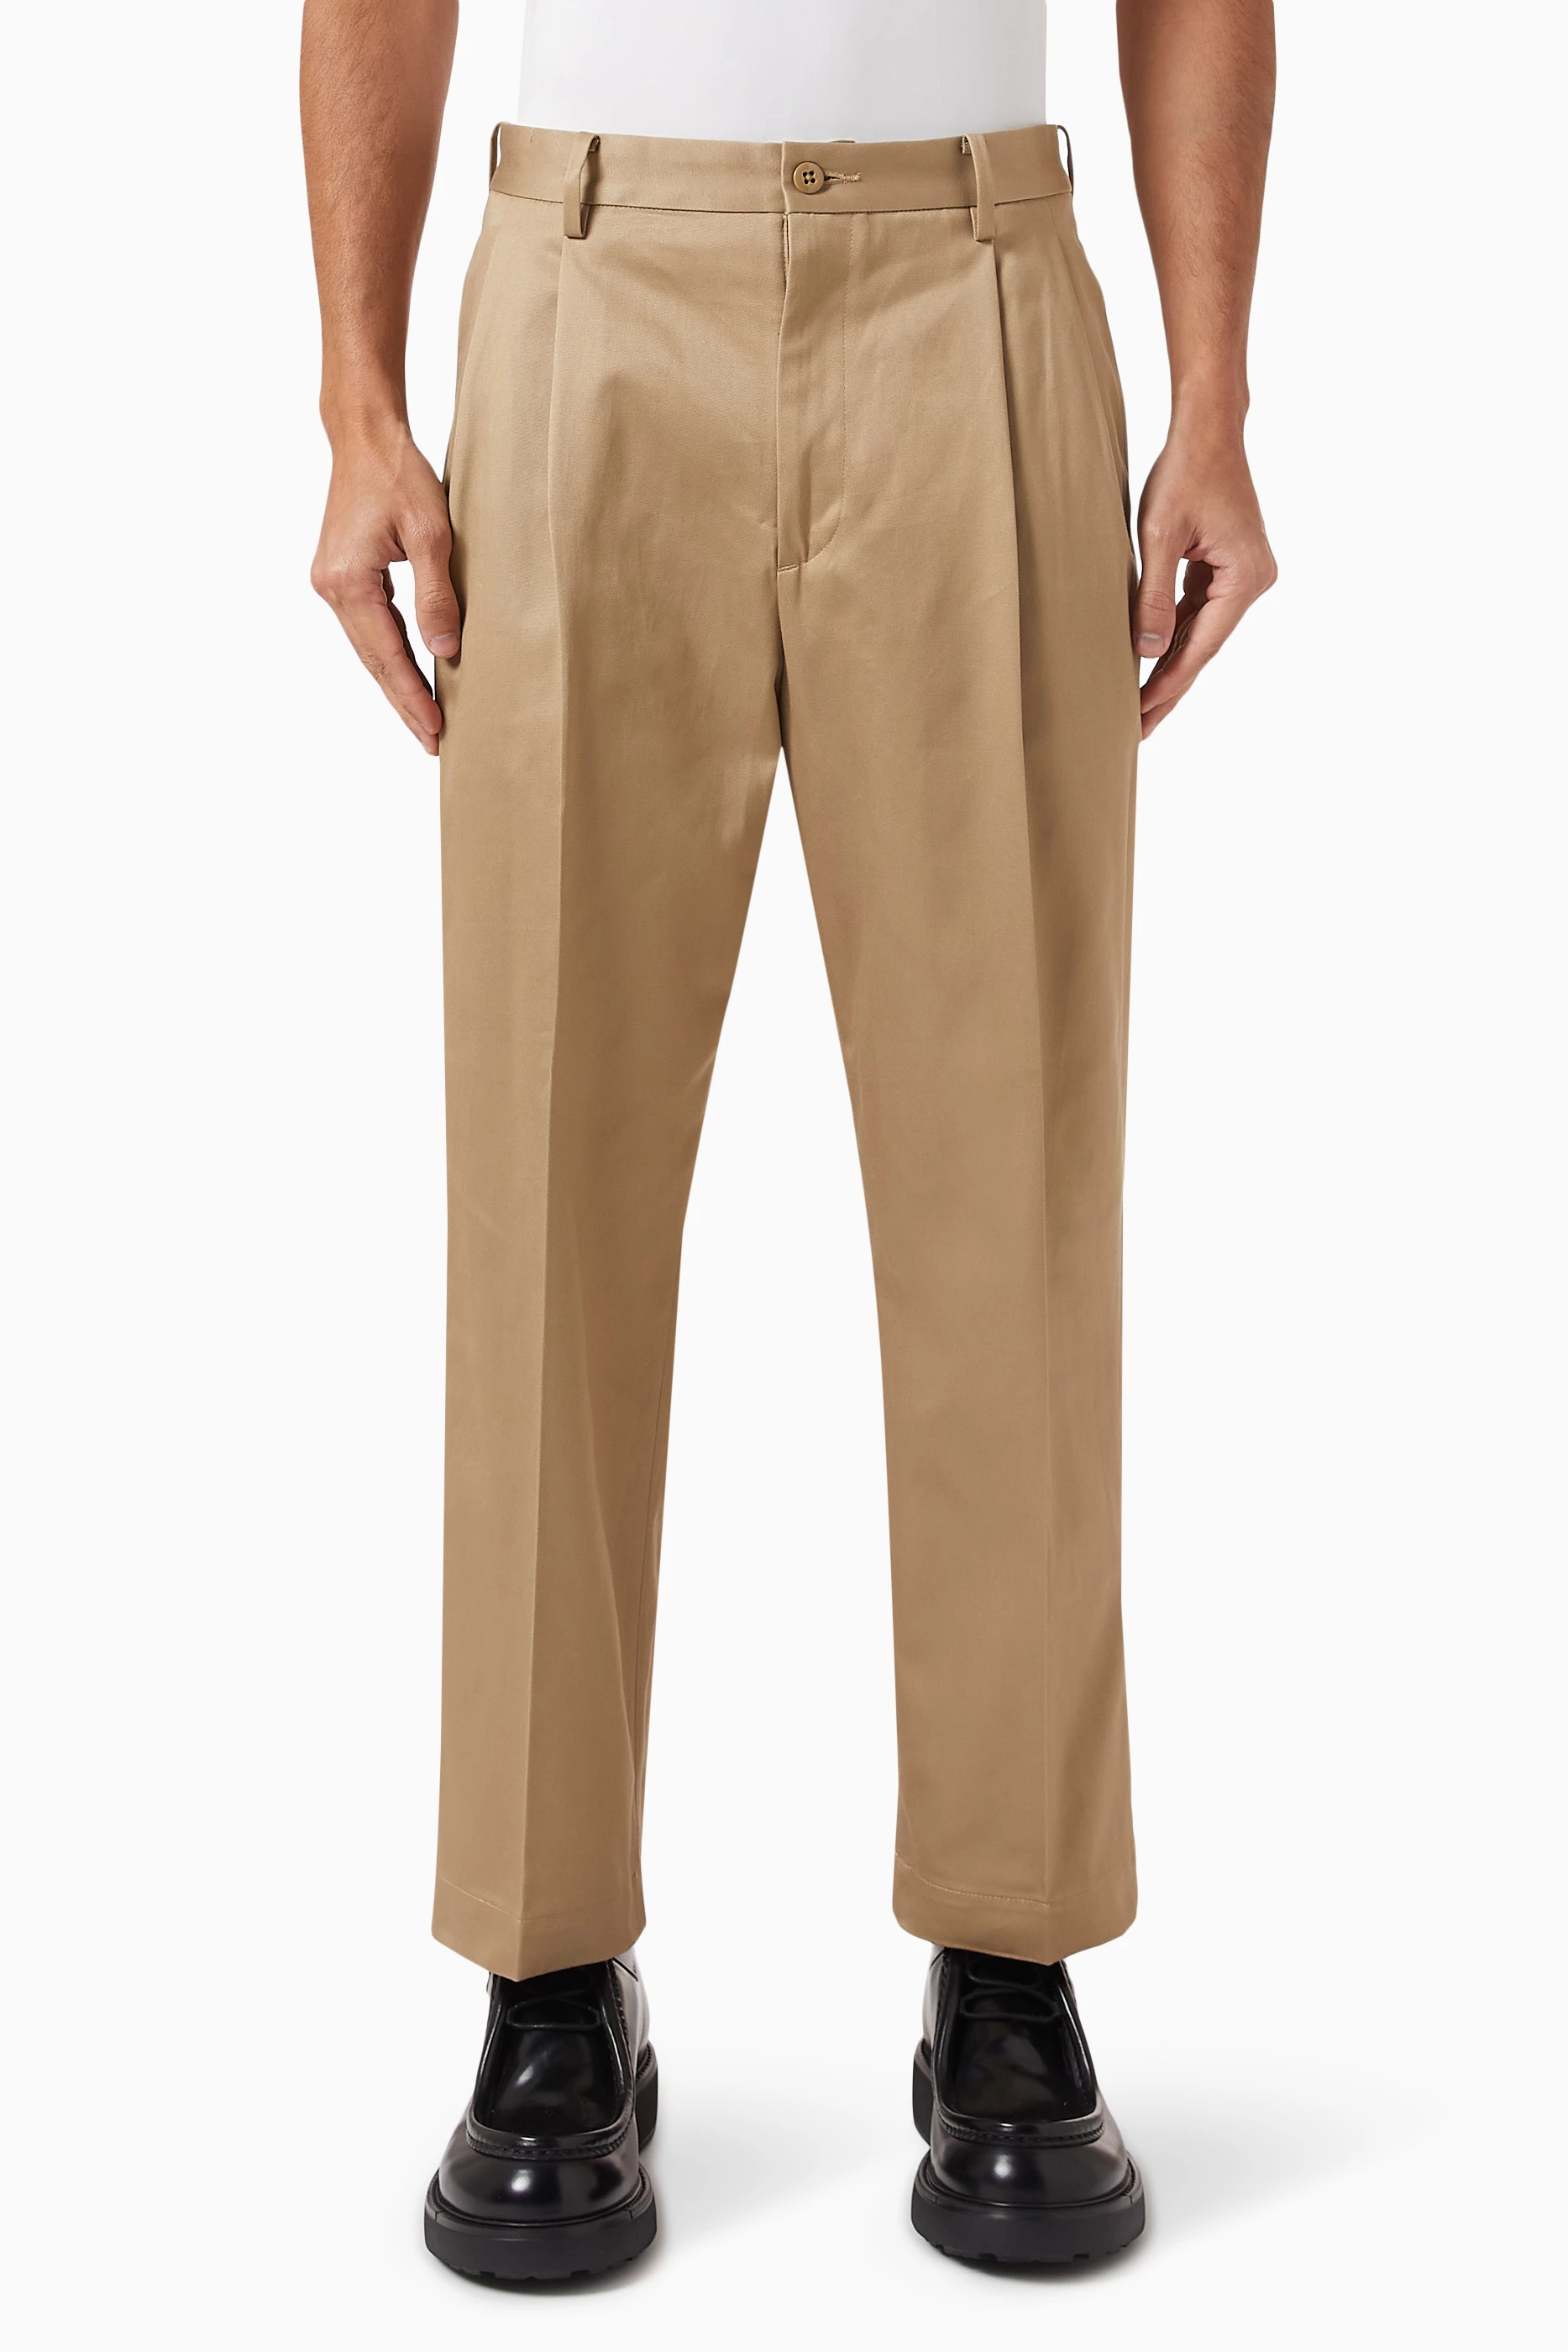 Buy WACKO MARIA Neutral Double-pleated Chino Pants in Woven